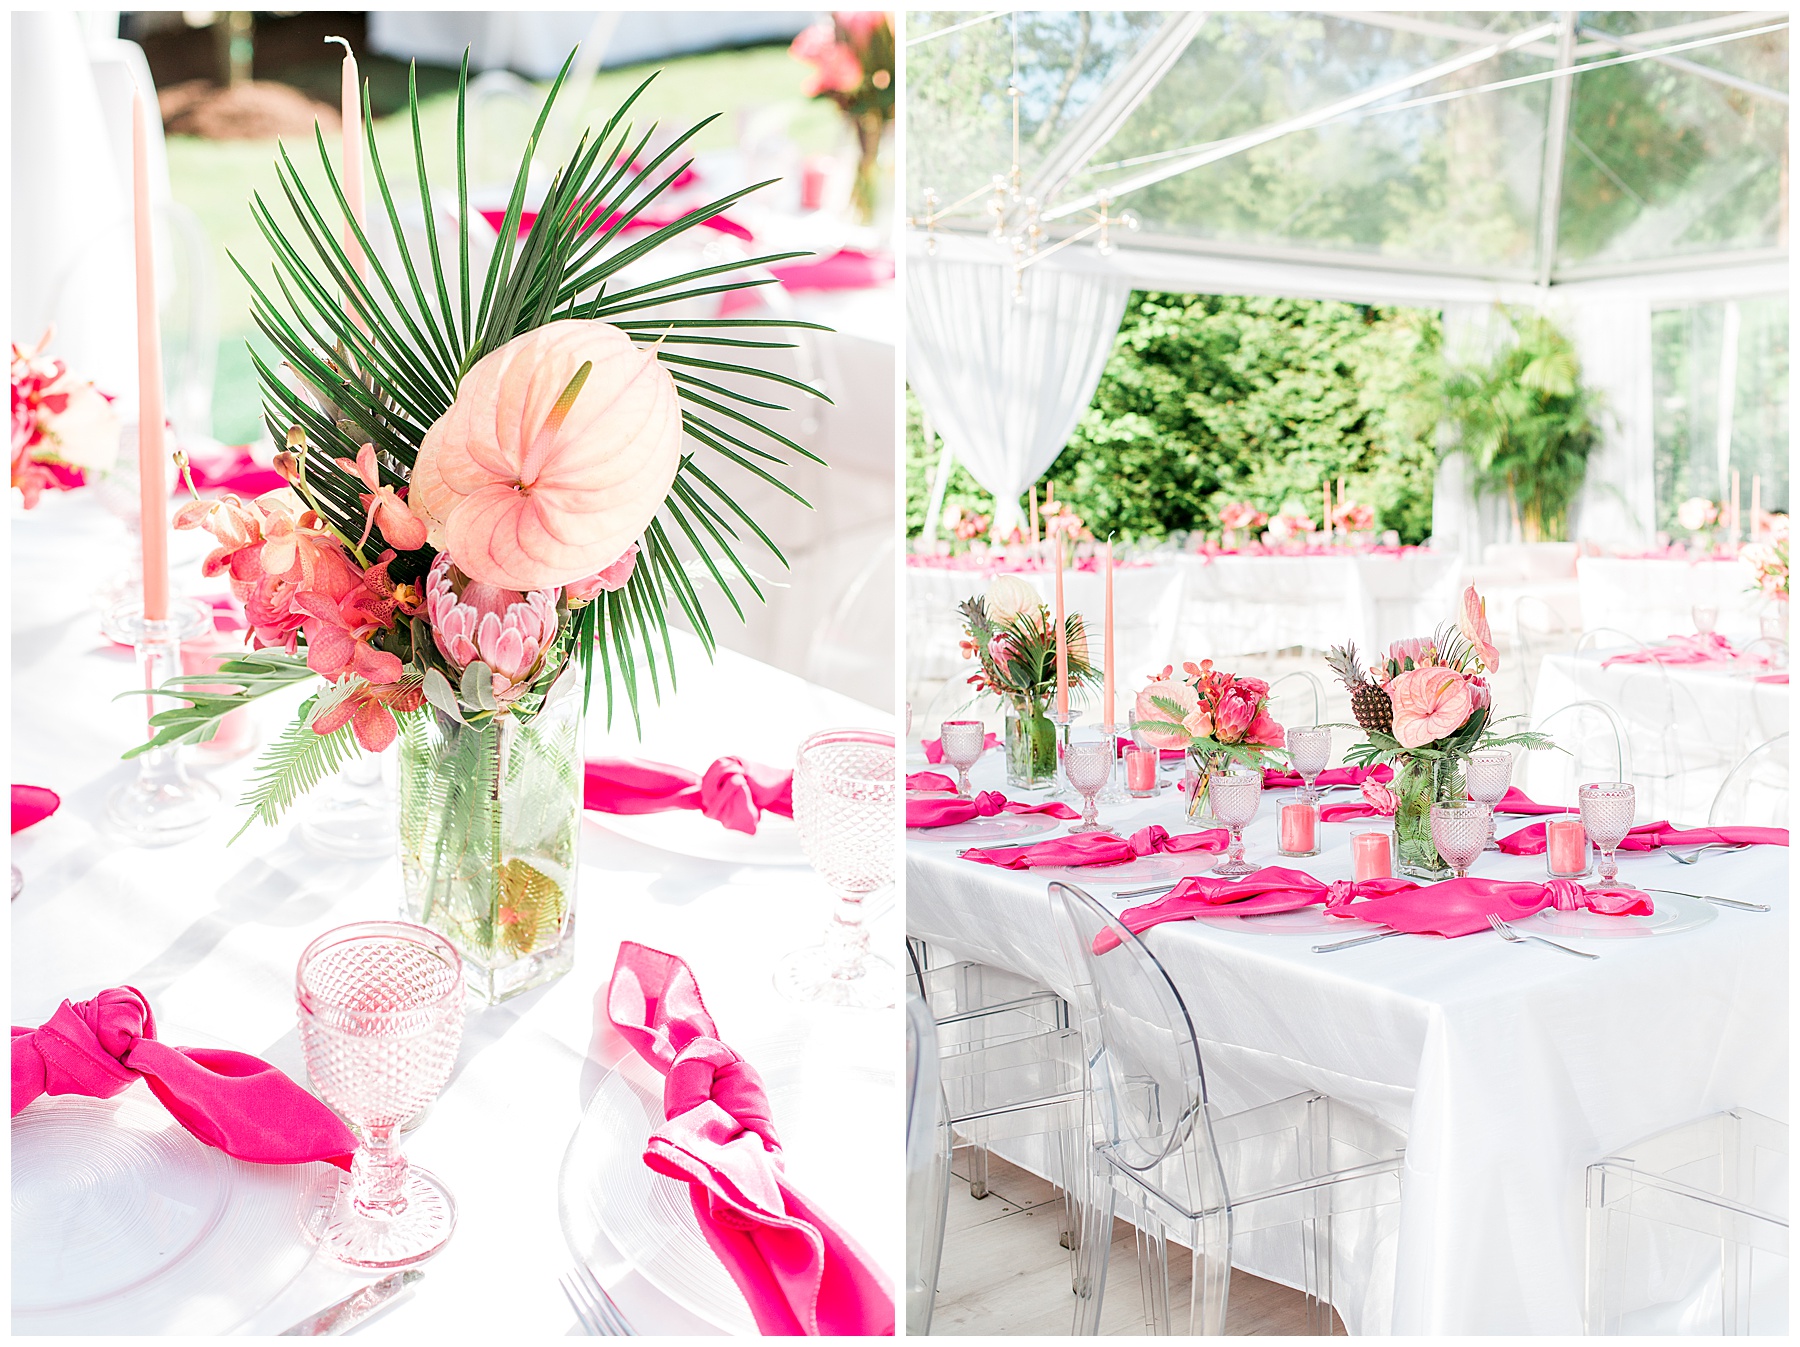 flowers on a table with bright pink napkins under a tent